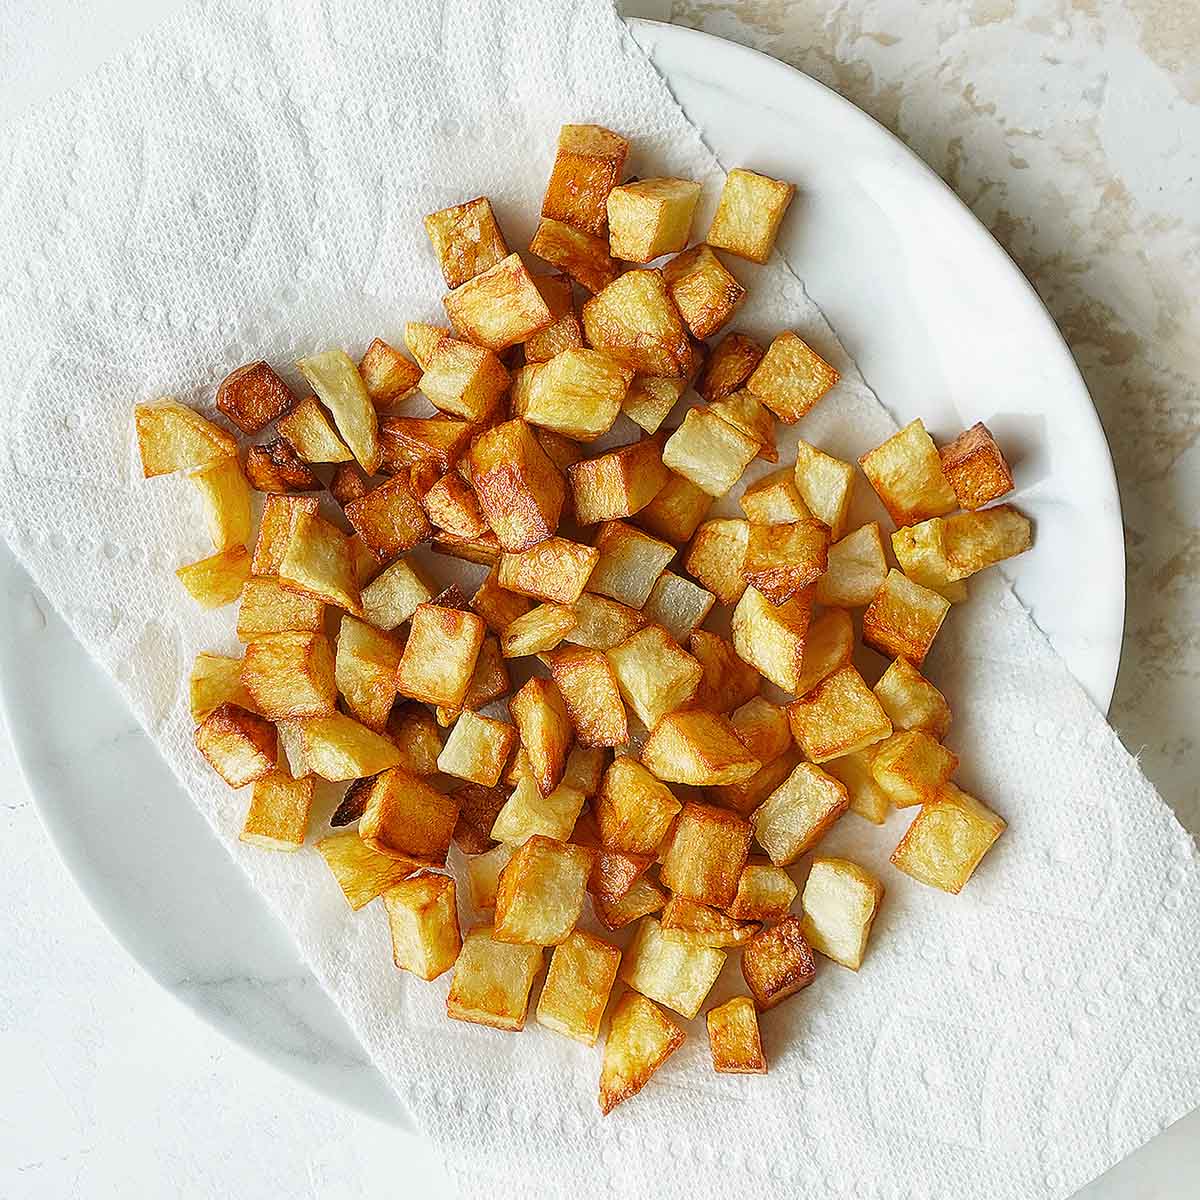 Fried cubed potatoes on a paper towel.